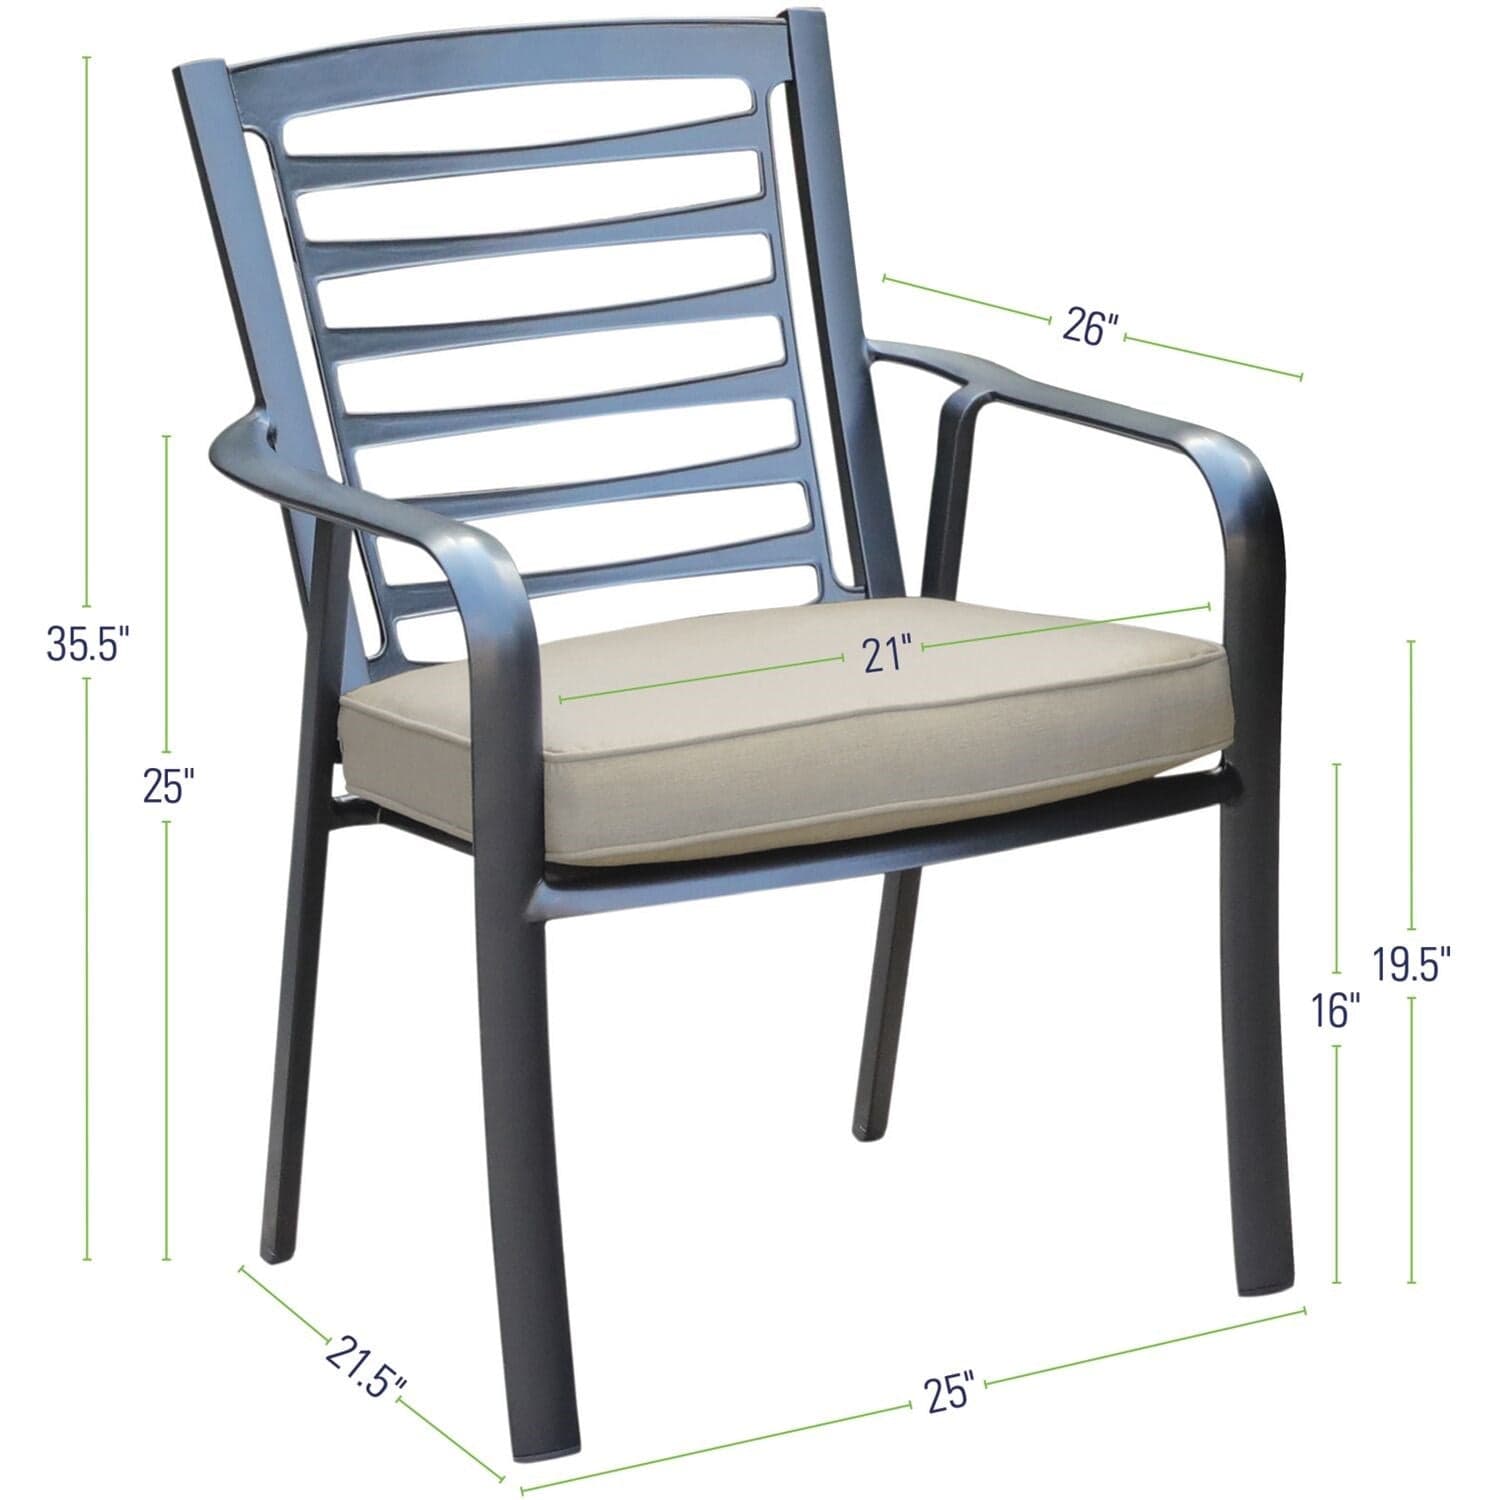 Hanover Outdoor Dining Chairs Hanover - Commercial aluminum dining chair with Sunbrella cushion - Gunmetal/Ash - PEMDNCHR-1GMASH